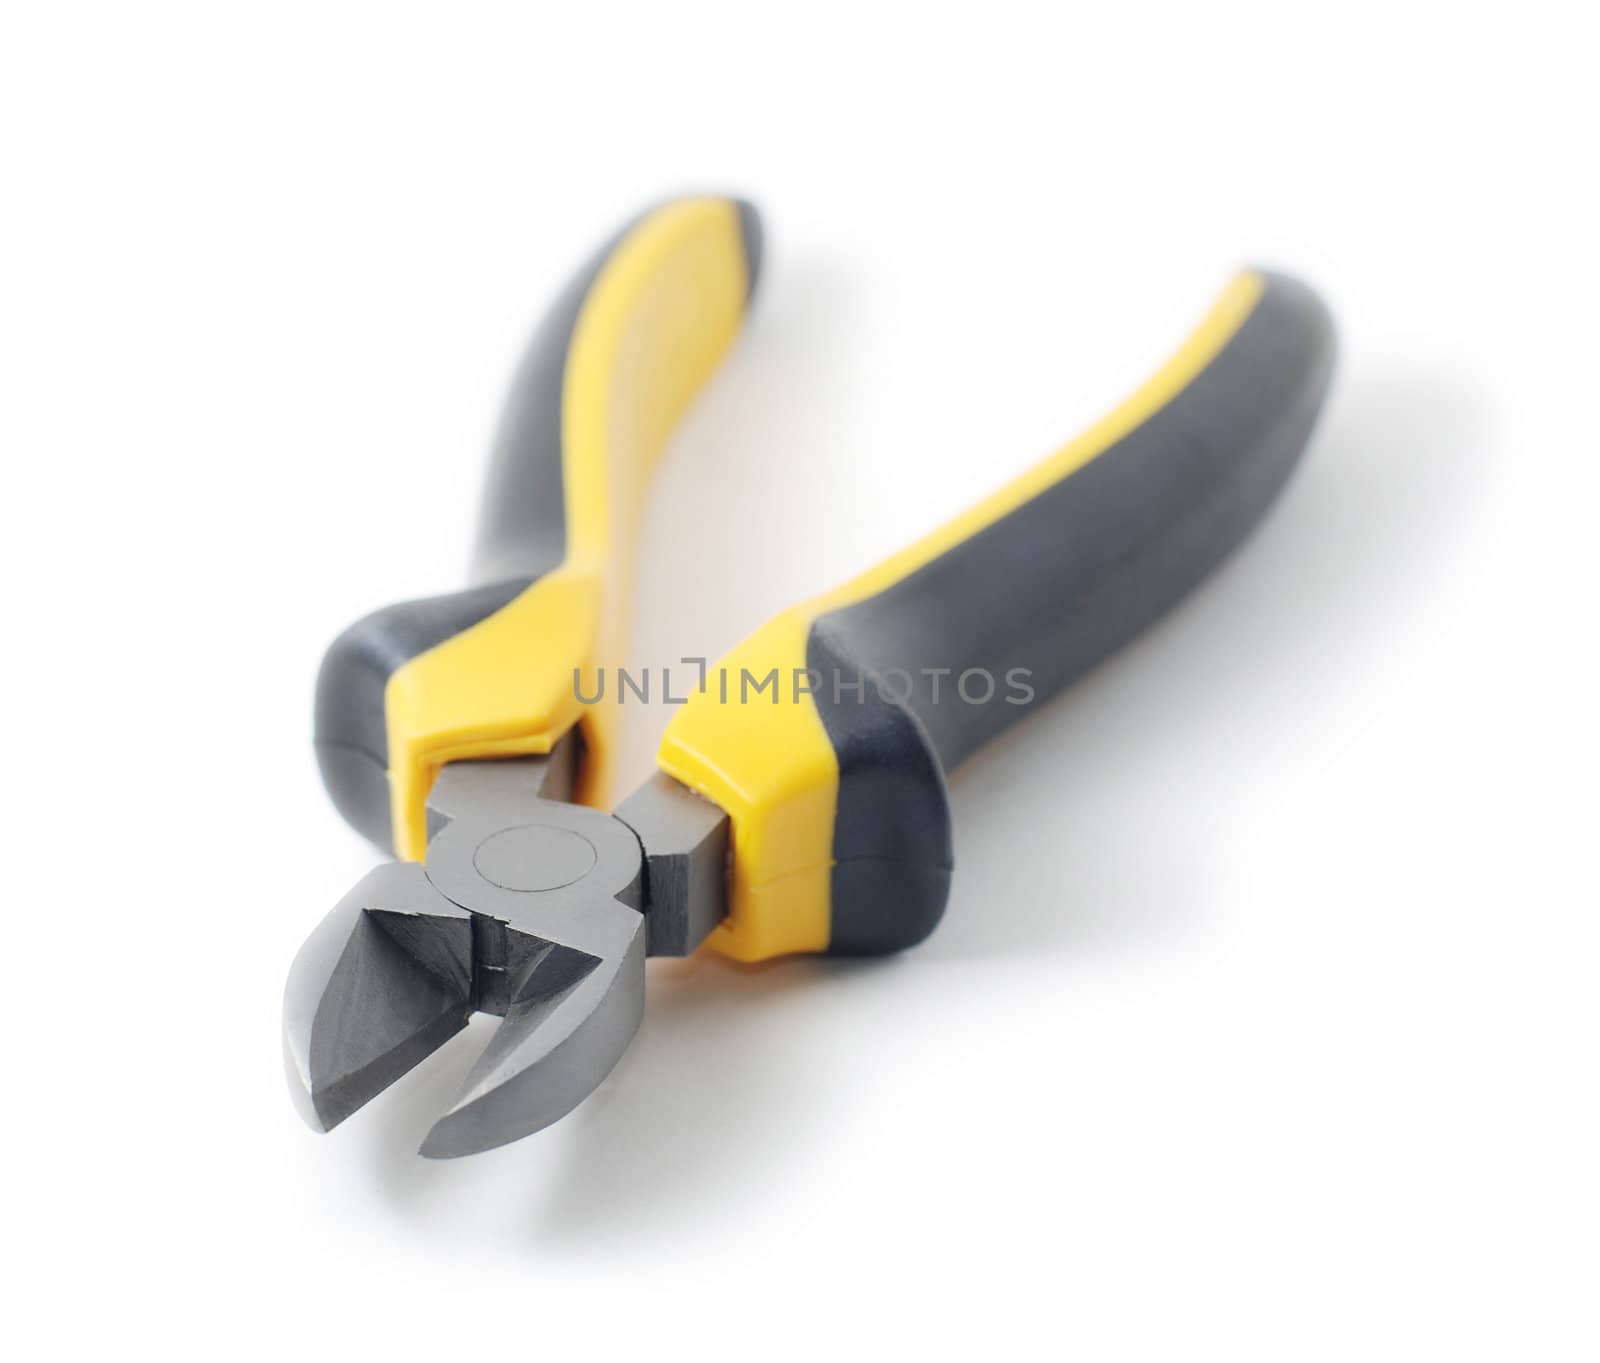 pliers on white background by Orfeus